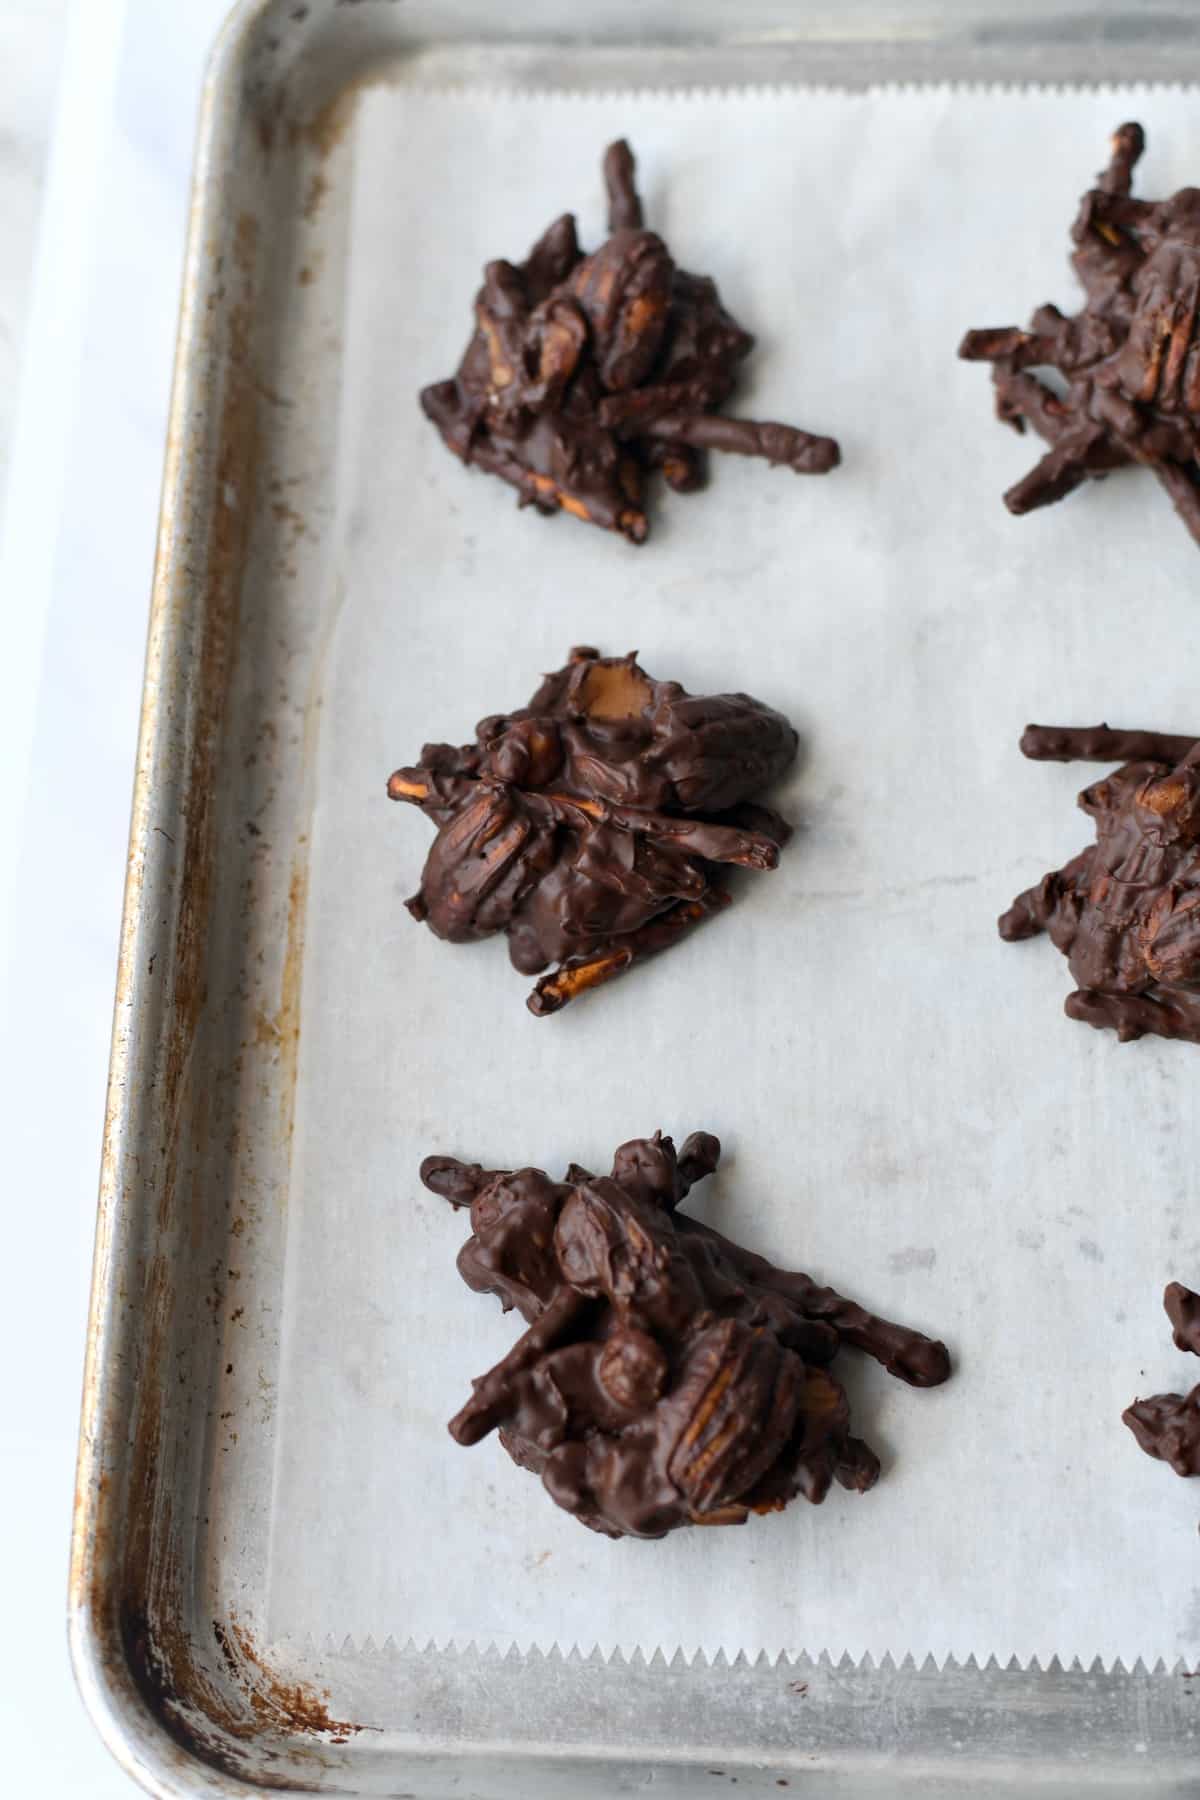 Dark chocolate pecan and pretzel clusters dropped on parchment paper on baking sheet.
